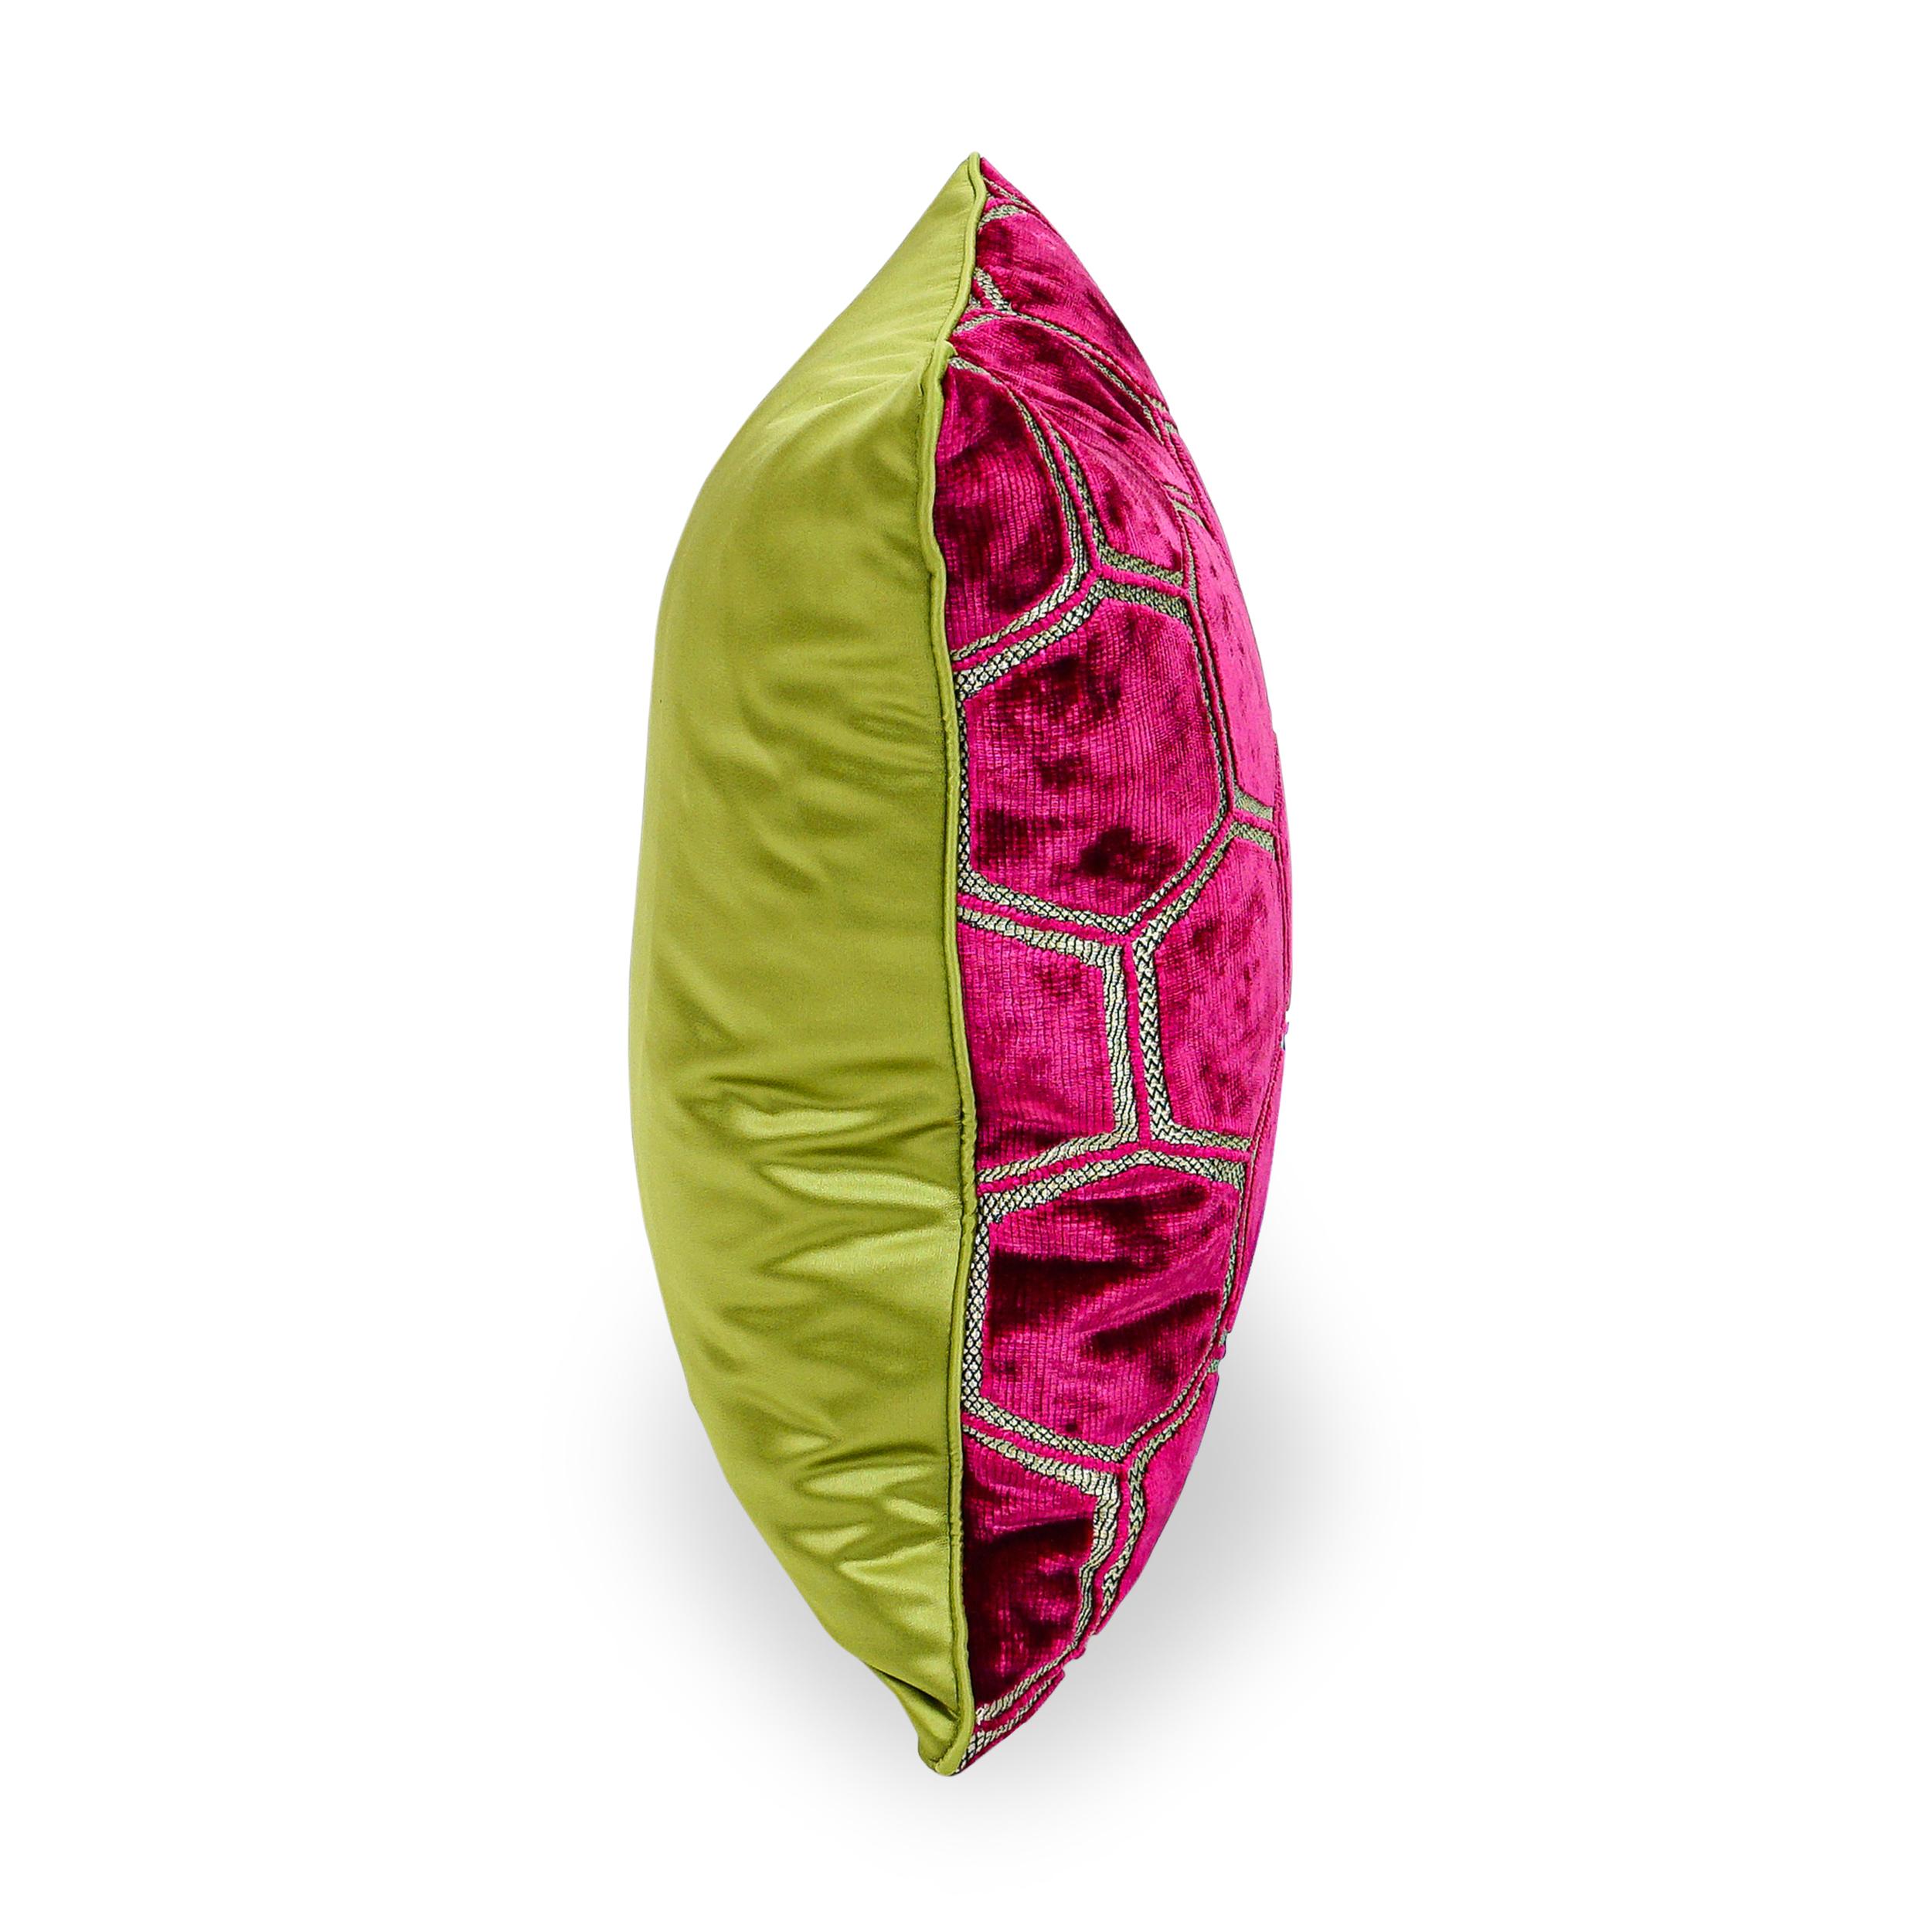 Fuchsia Hexagonal Cut Velvet Square Pillows with Chartreuse Sateen Back For Sale 4